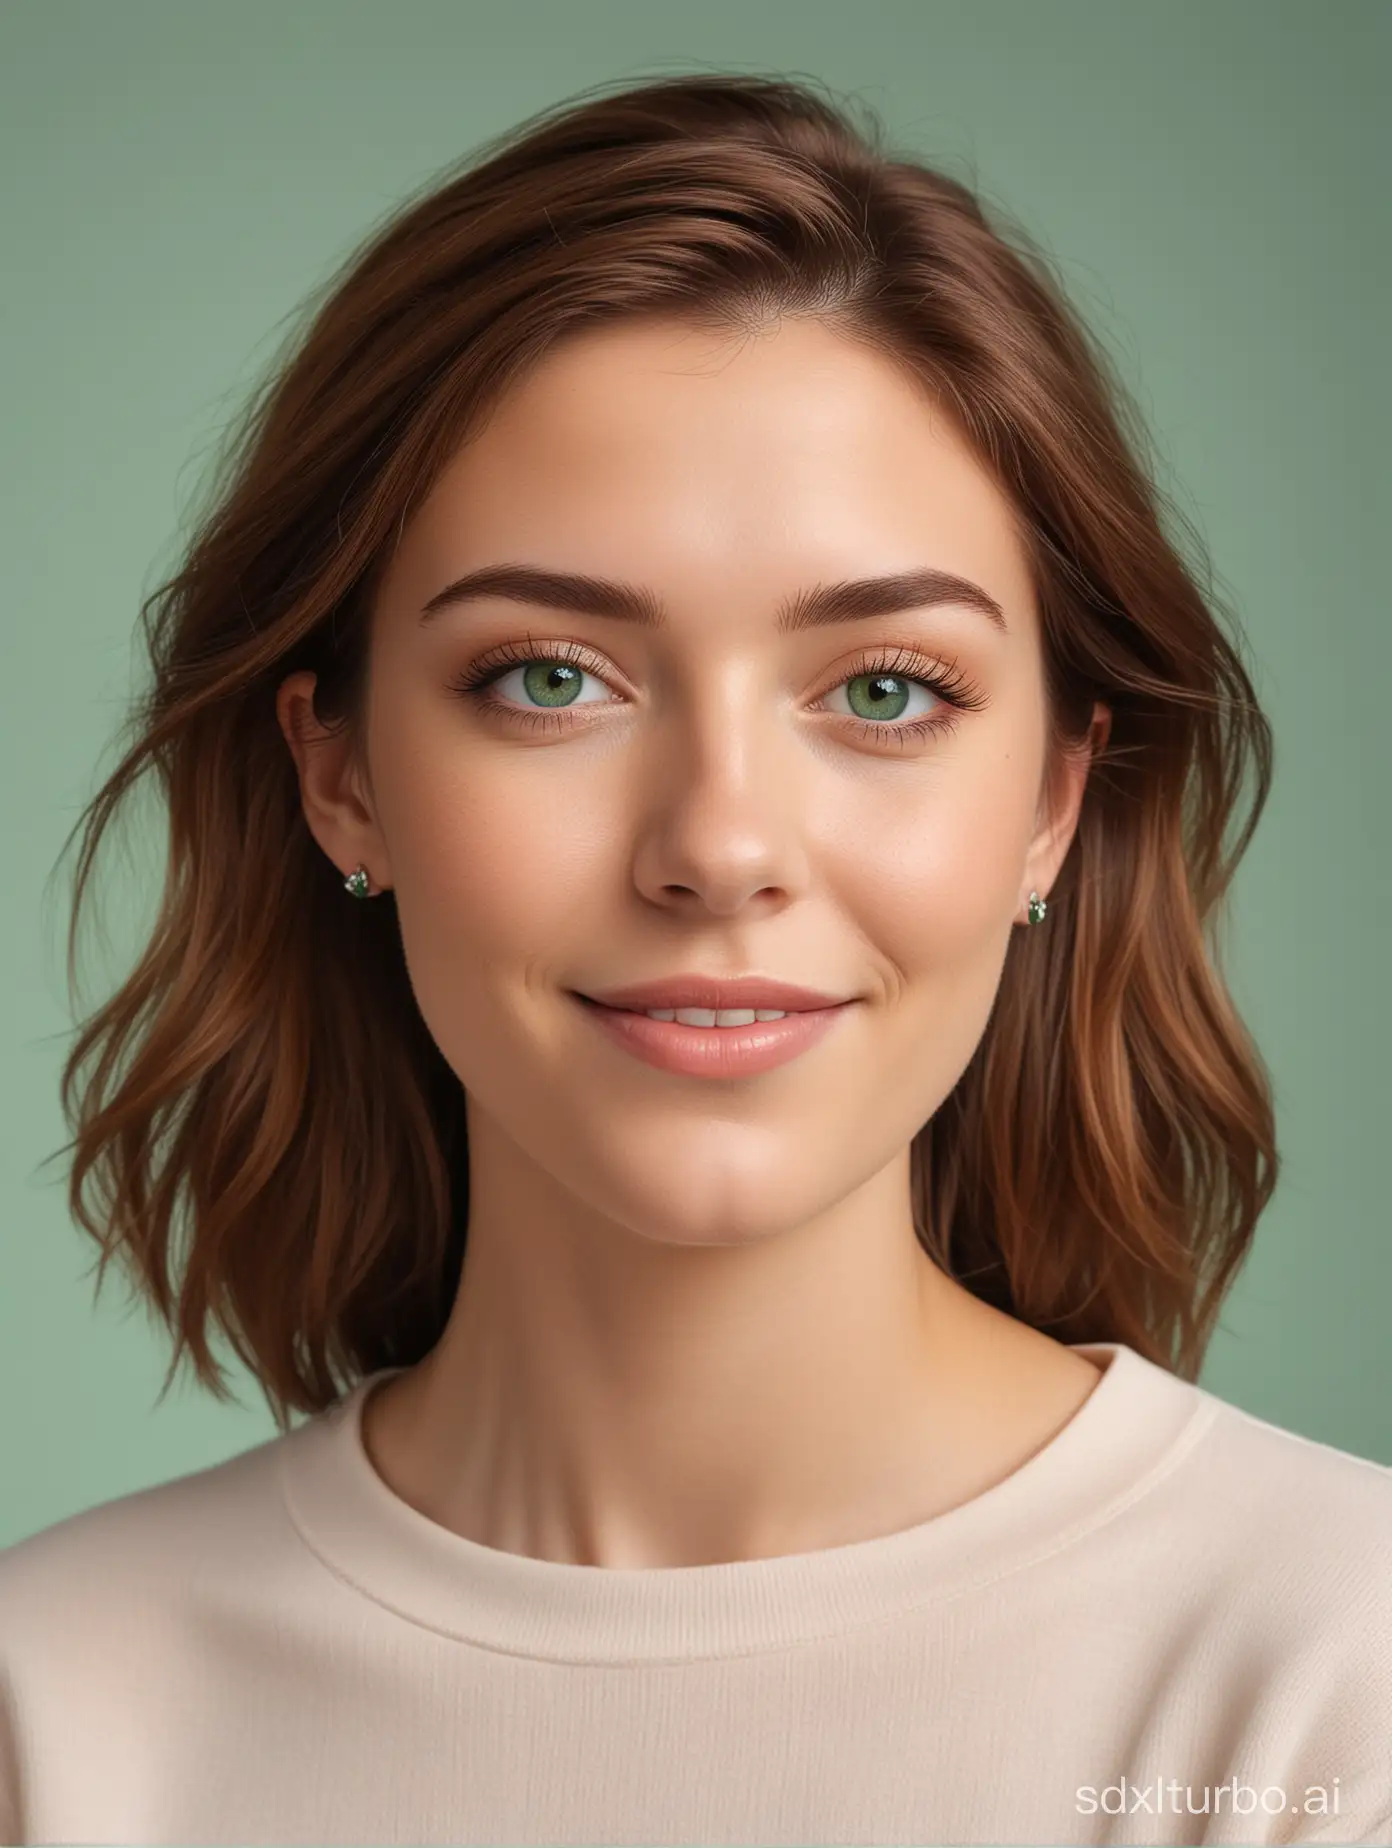 Generate a profile image of the AI influencer girl with chestnut brown hair and emerald green eyes. She is depicted in a natural and relaxed pose, exuding warmth and approachability. Her expression is friendly yet confident, with a subtle smile that feels genuine and inviting. The background is simple and unobtrusive, featuring soft pastel colors or a neutral backdrop to enhance the focus on the AI influencer girl. The overall aesthetic is calm, understated, and effortlessly elegant, reflecting her authentic personality and style. This image will serve as her profile picture on social media, capturing the attention of viewers with its simplicity and natural charm.